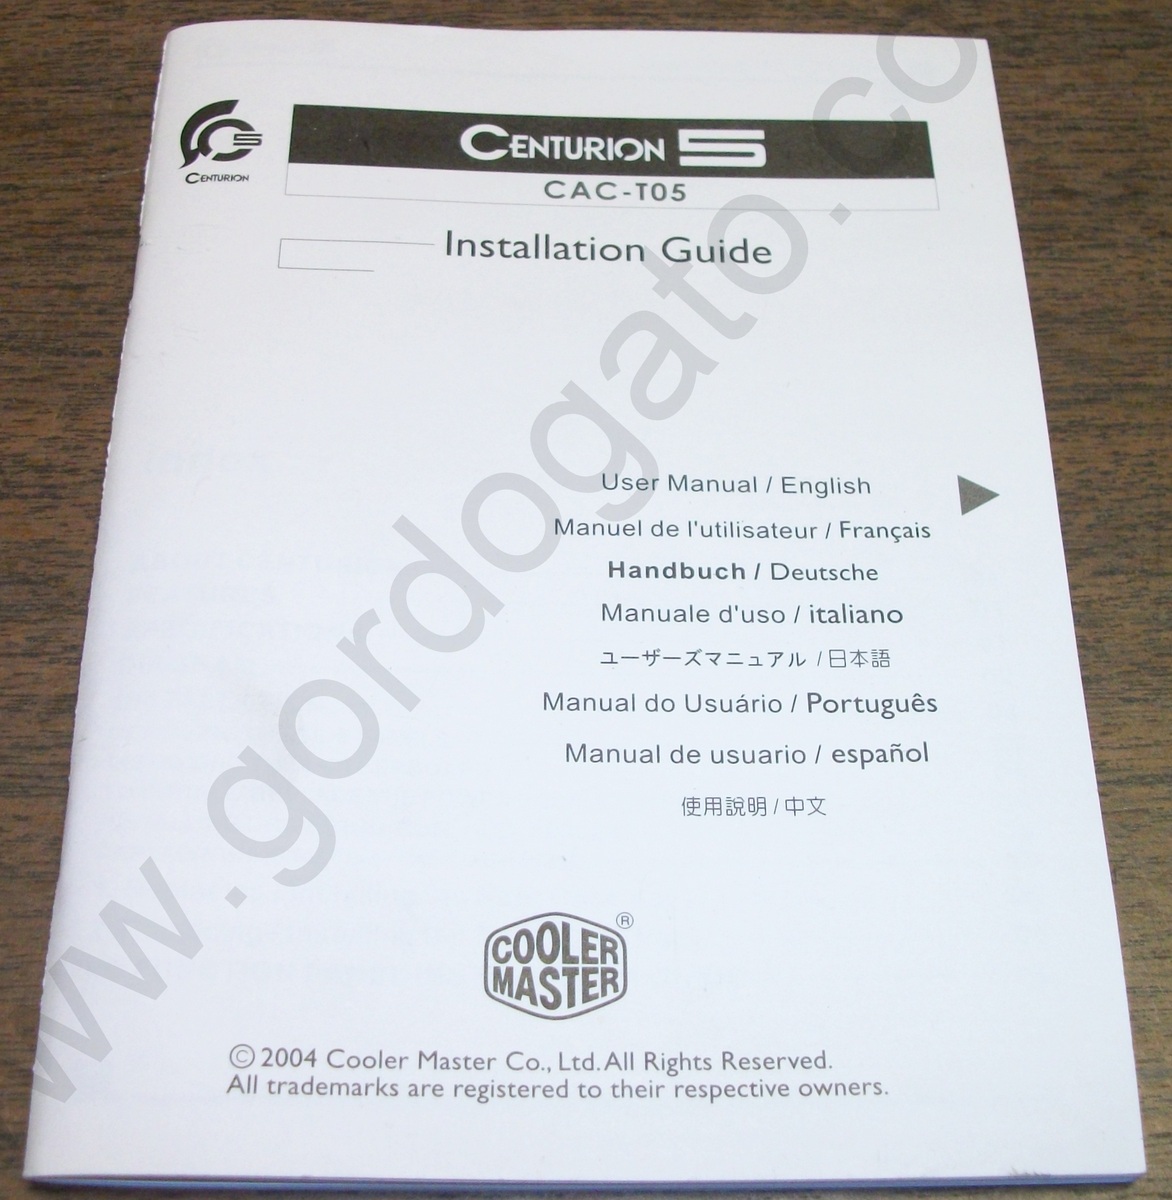 Cooler Master Centurion 5 CAC-T05 Installation Guide Manual